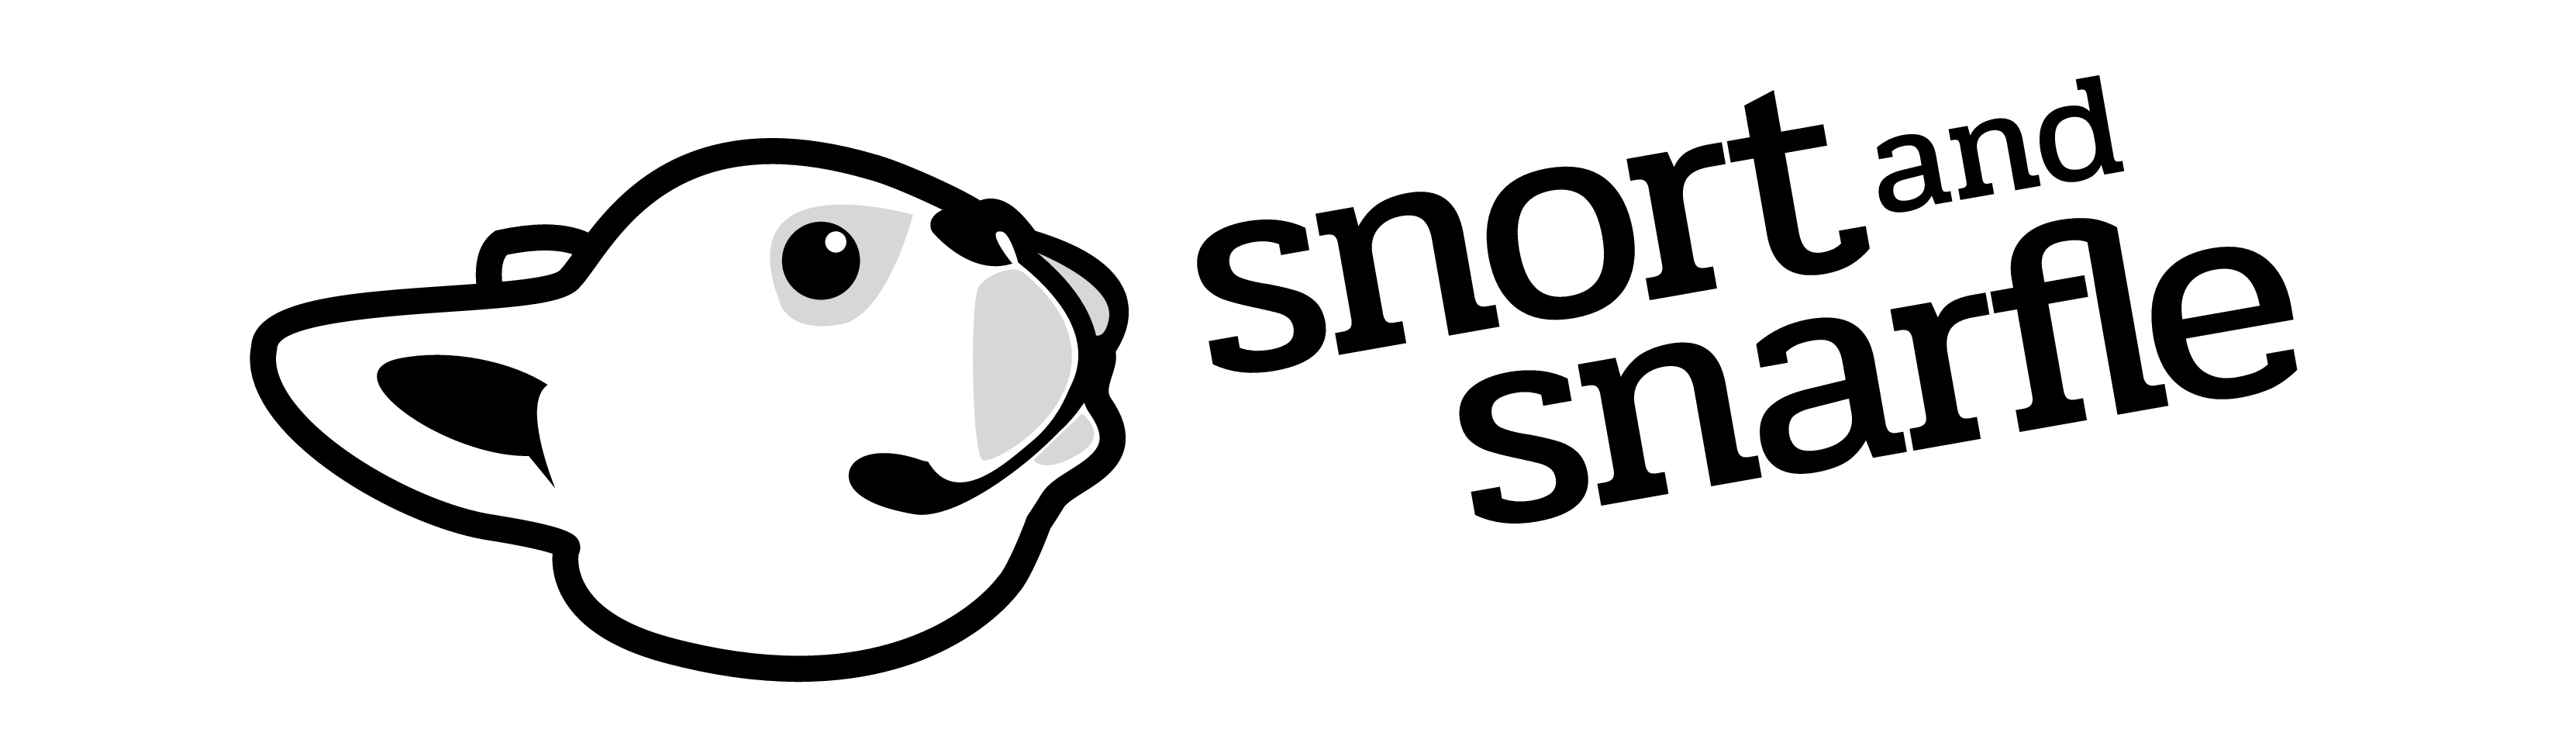 Snort and Snarfle